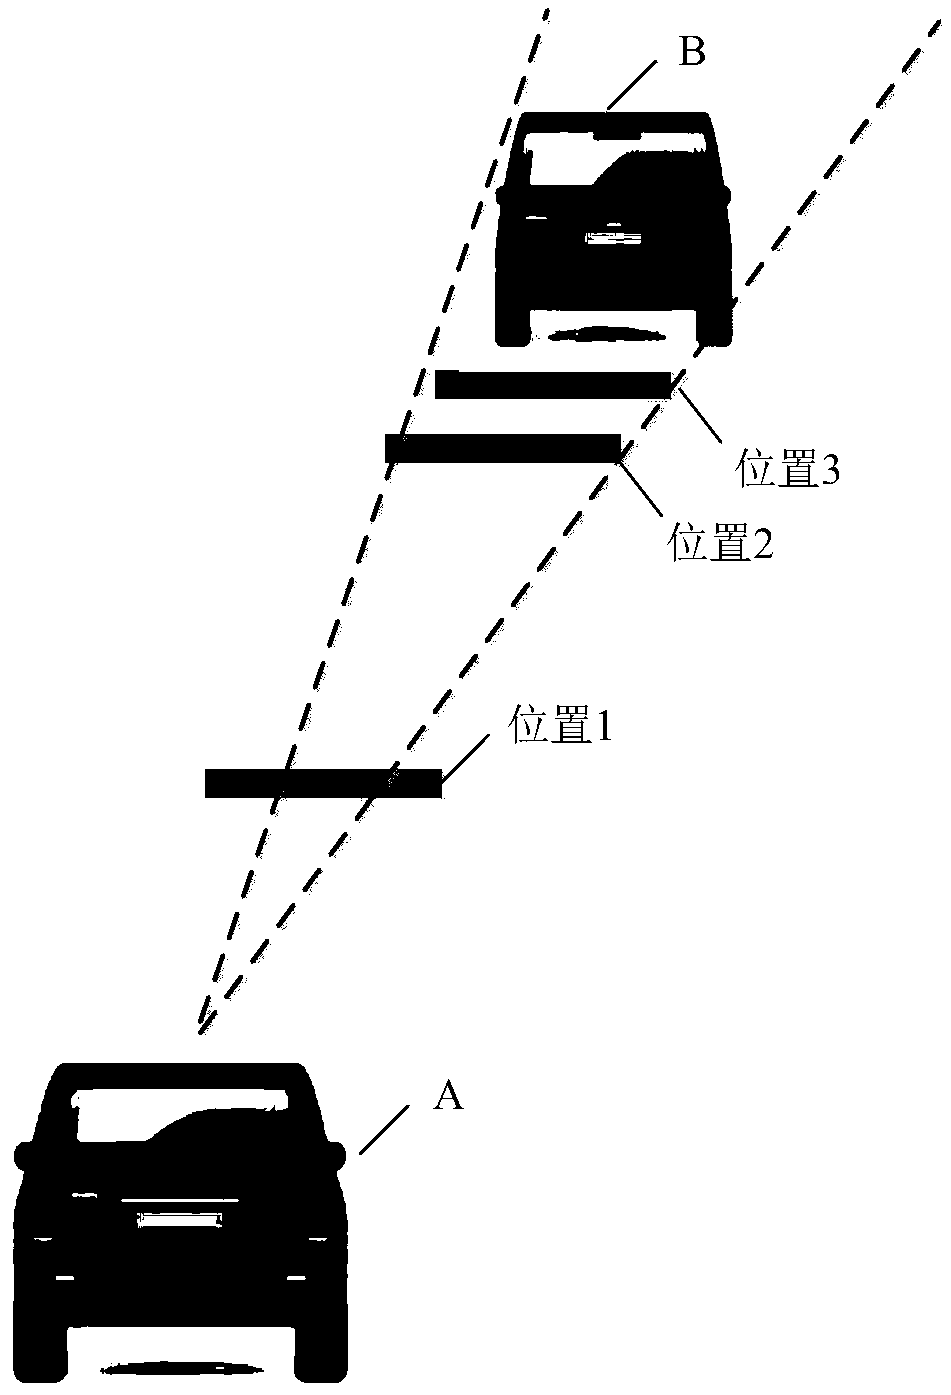 A method and apparatus for control a high beam lamp